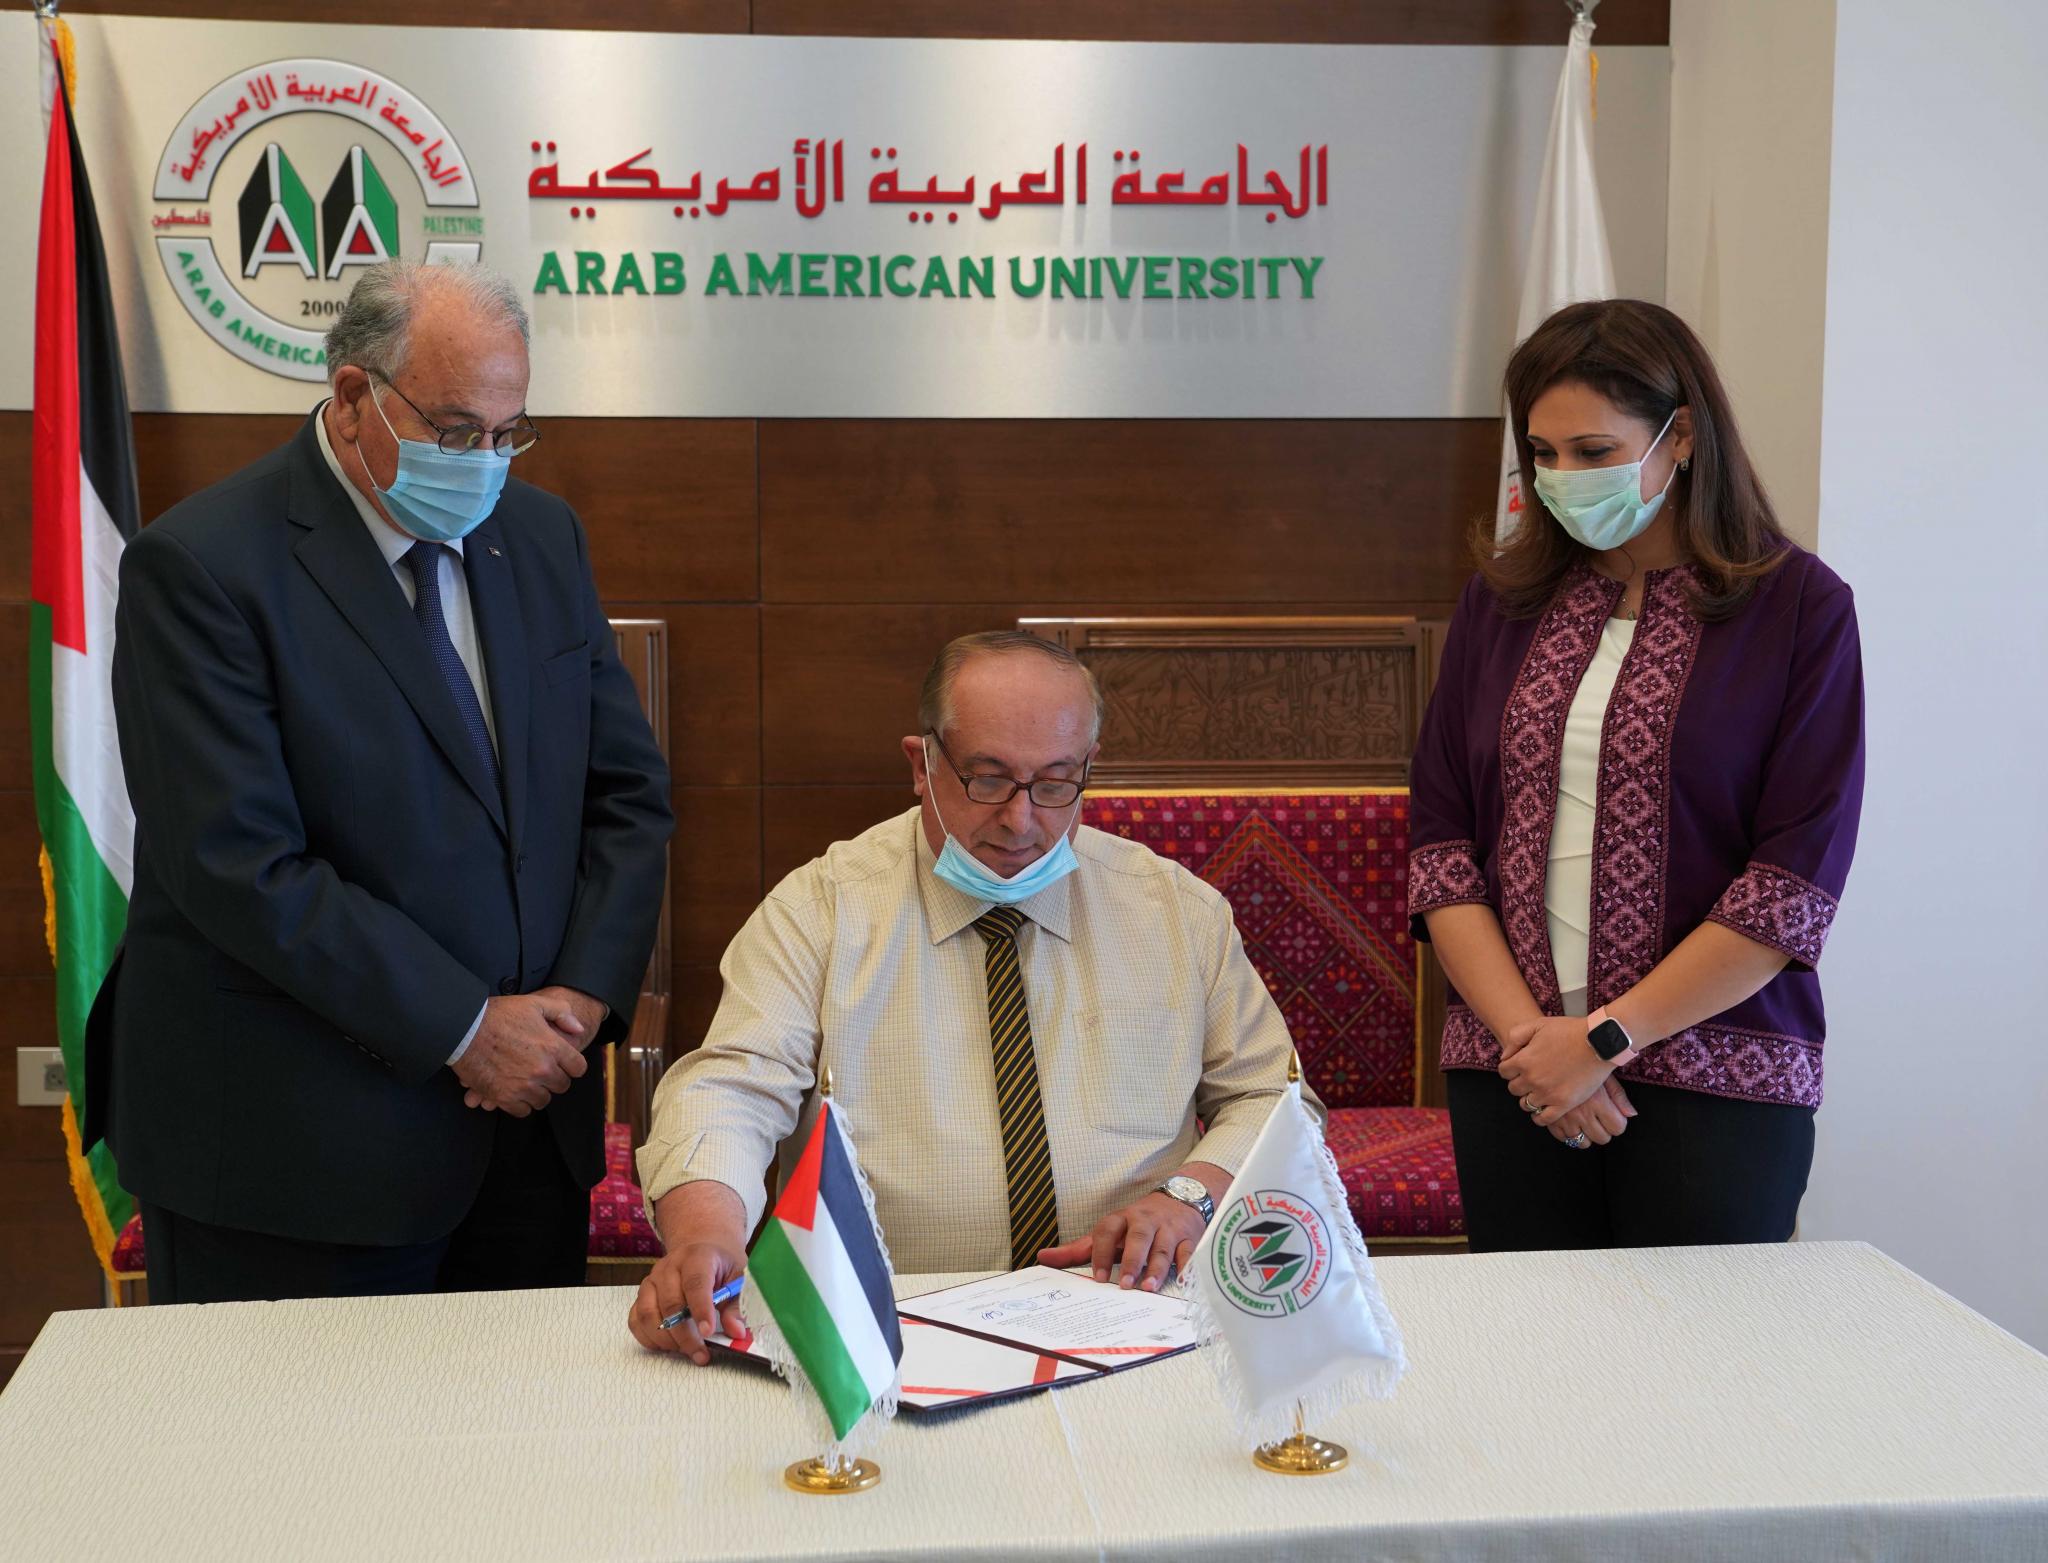 The Signing of an Agreement between AAUP and the Palestinian Central Bureau of Statistics to Start the BA Program in "Statistics and Data Sciences"